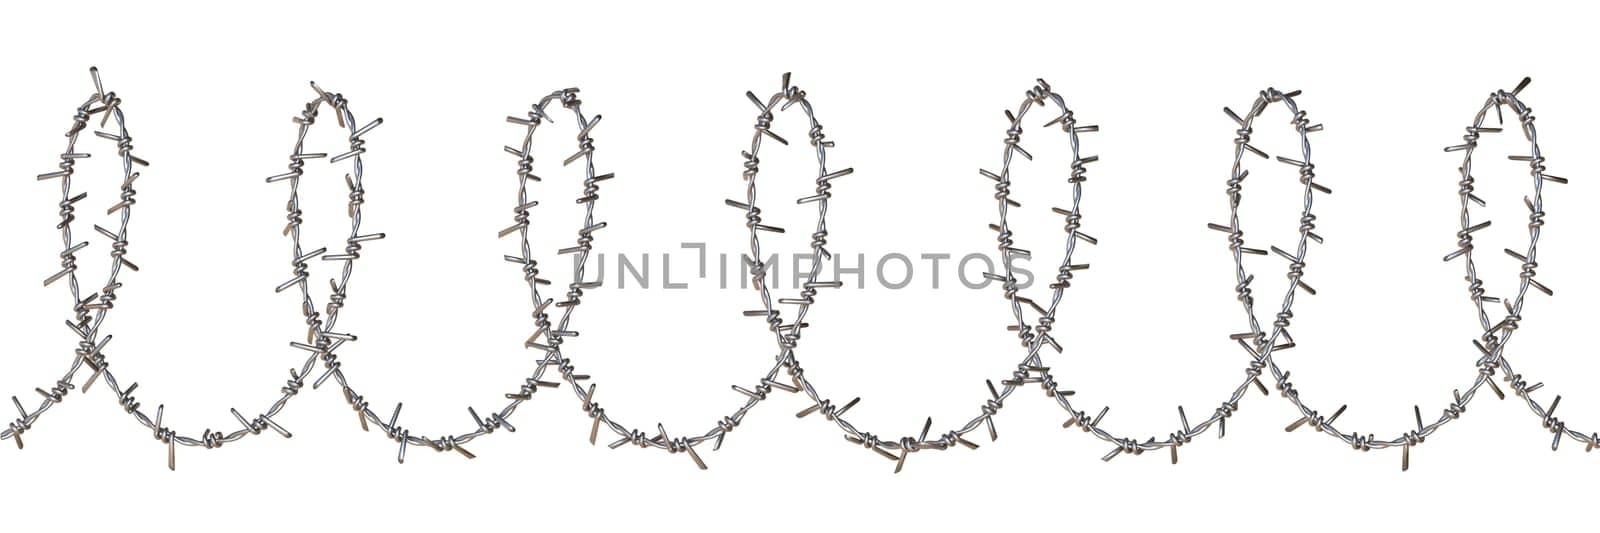 Barbed wire fence 3D rendering illustration isolated on white background